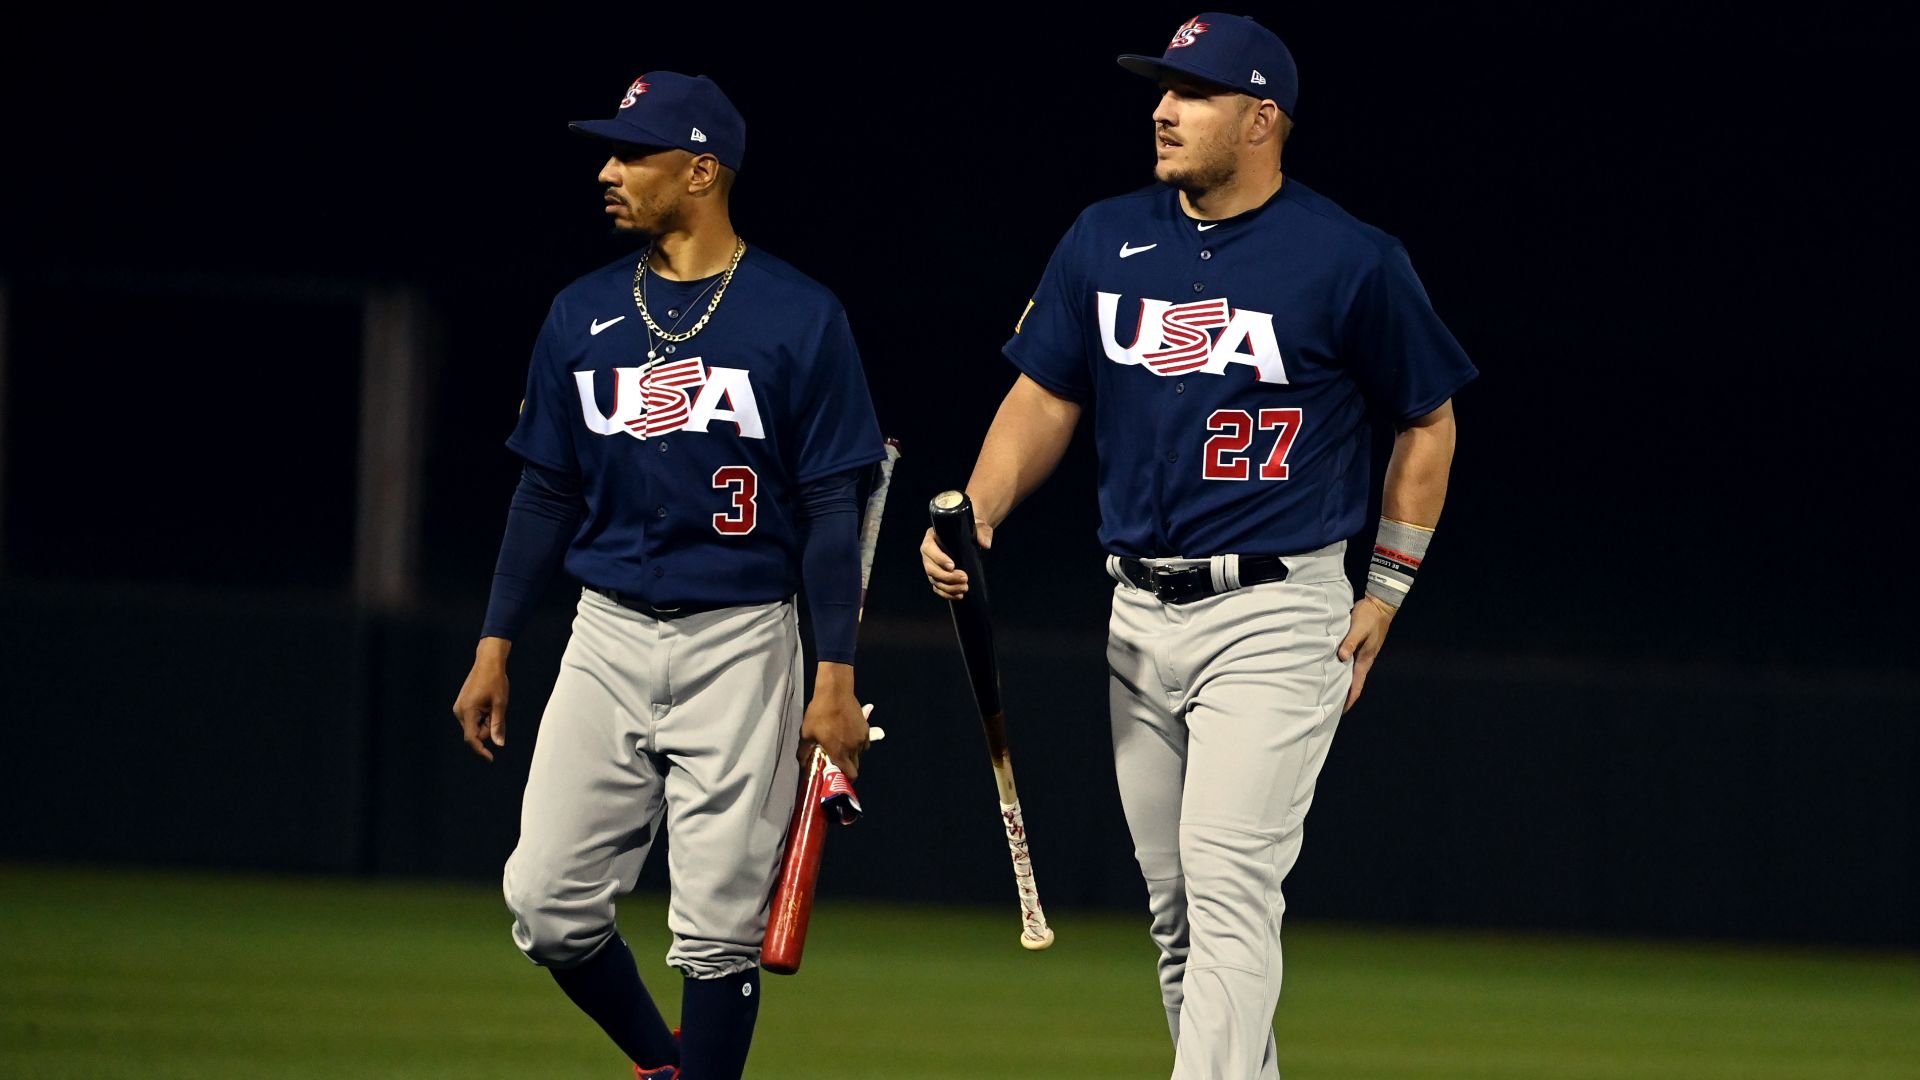 Manager Mark DeRosa stands with J.T. Realmuto during the Team USA News  Photo - Getty Images